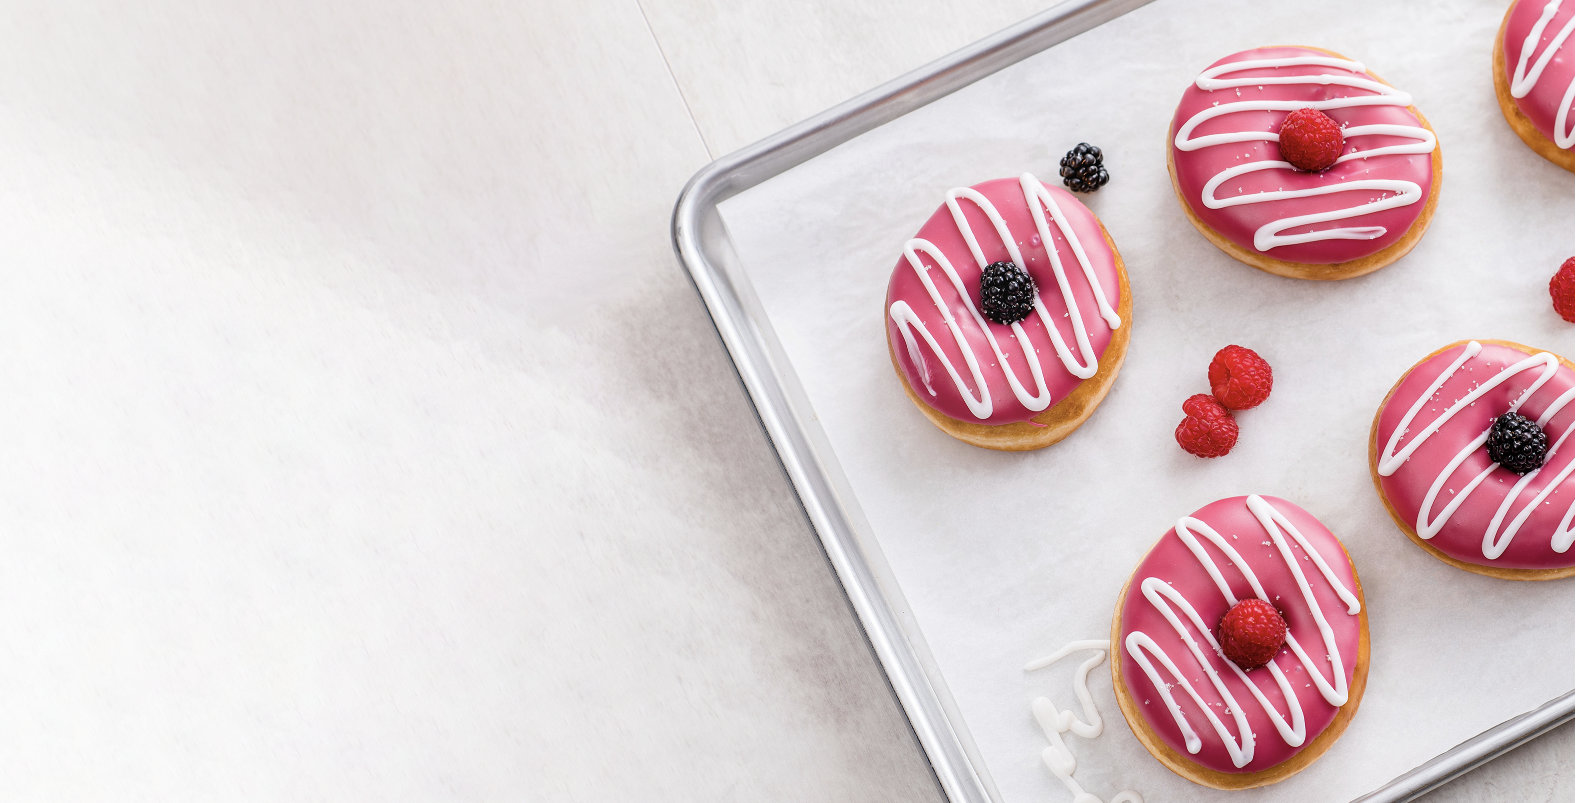 Donuts with pink and white icing garnished with berries on a baking sheet